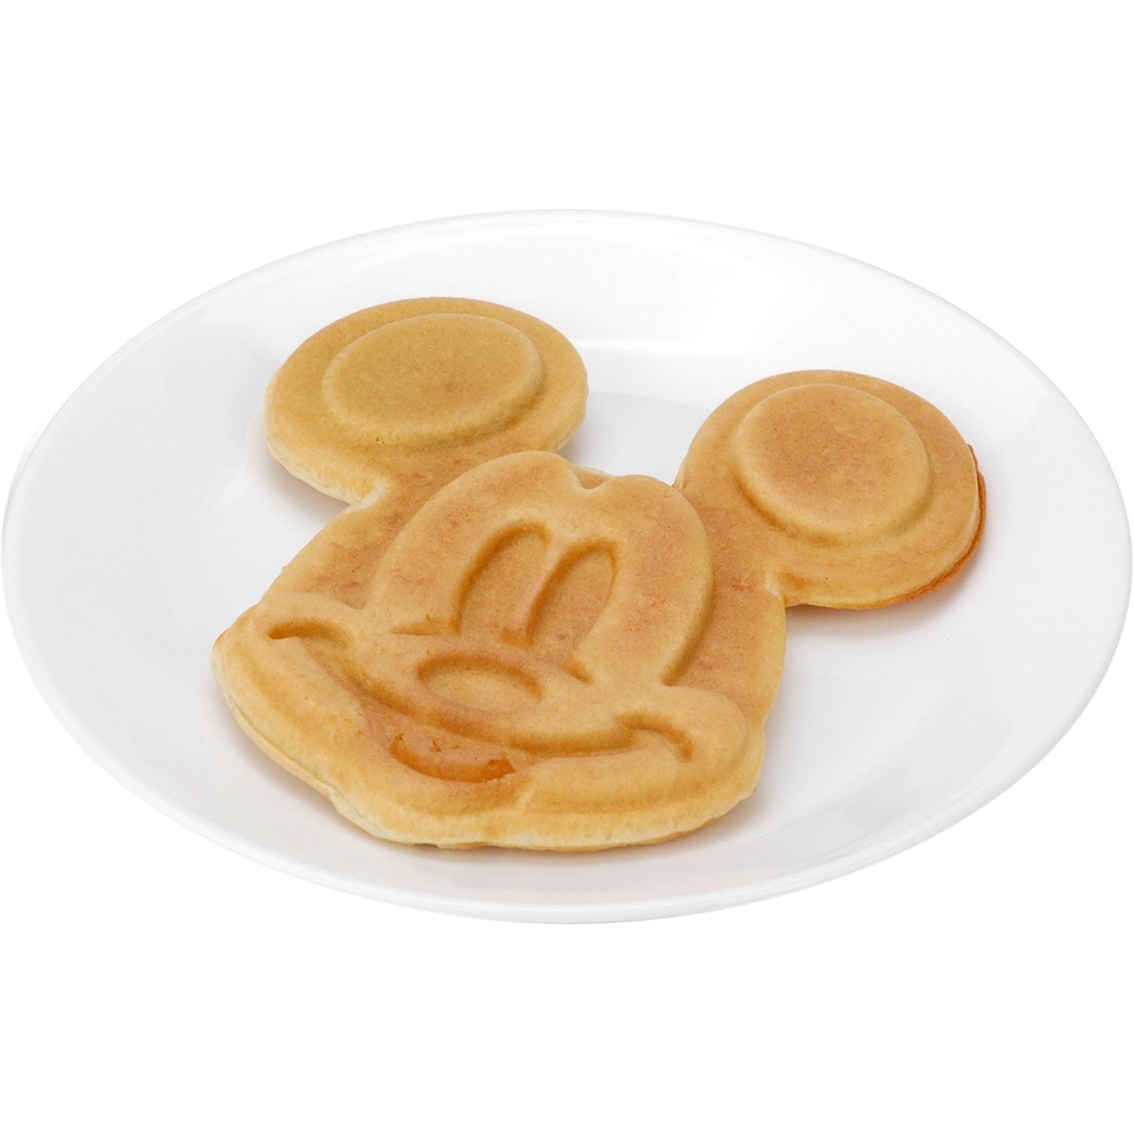 Mickey Mouse Oh Boy Waffle Maker - Image 4 of 4